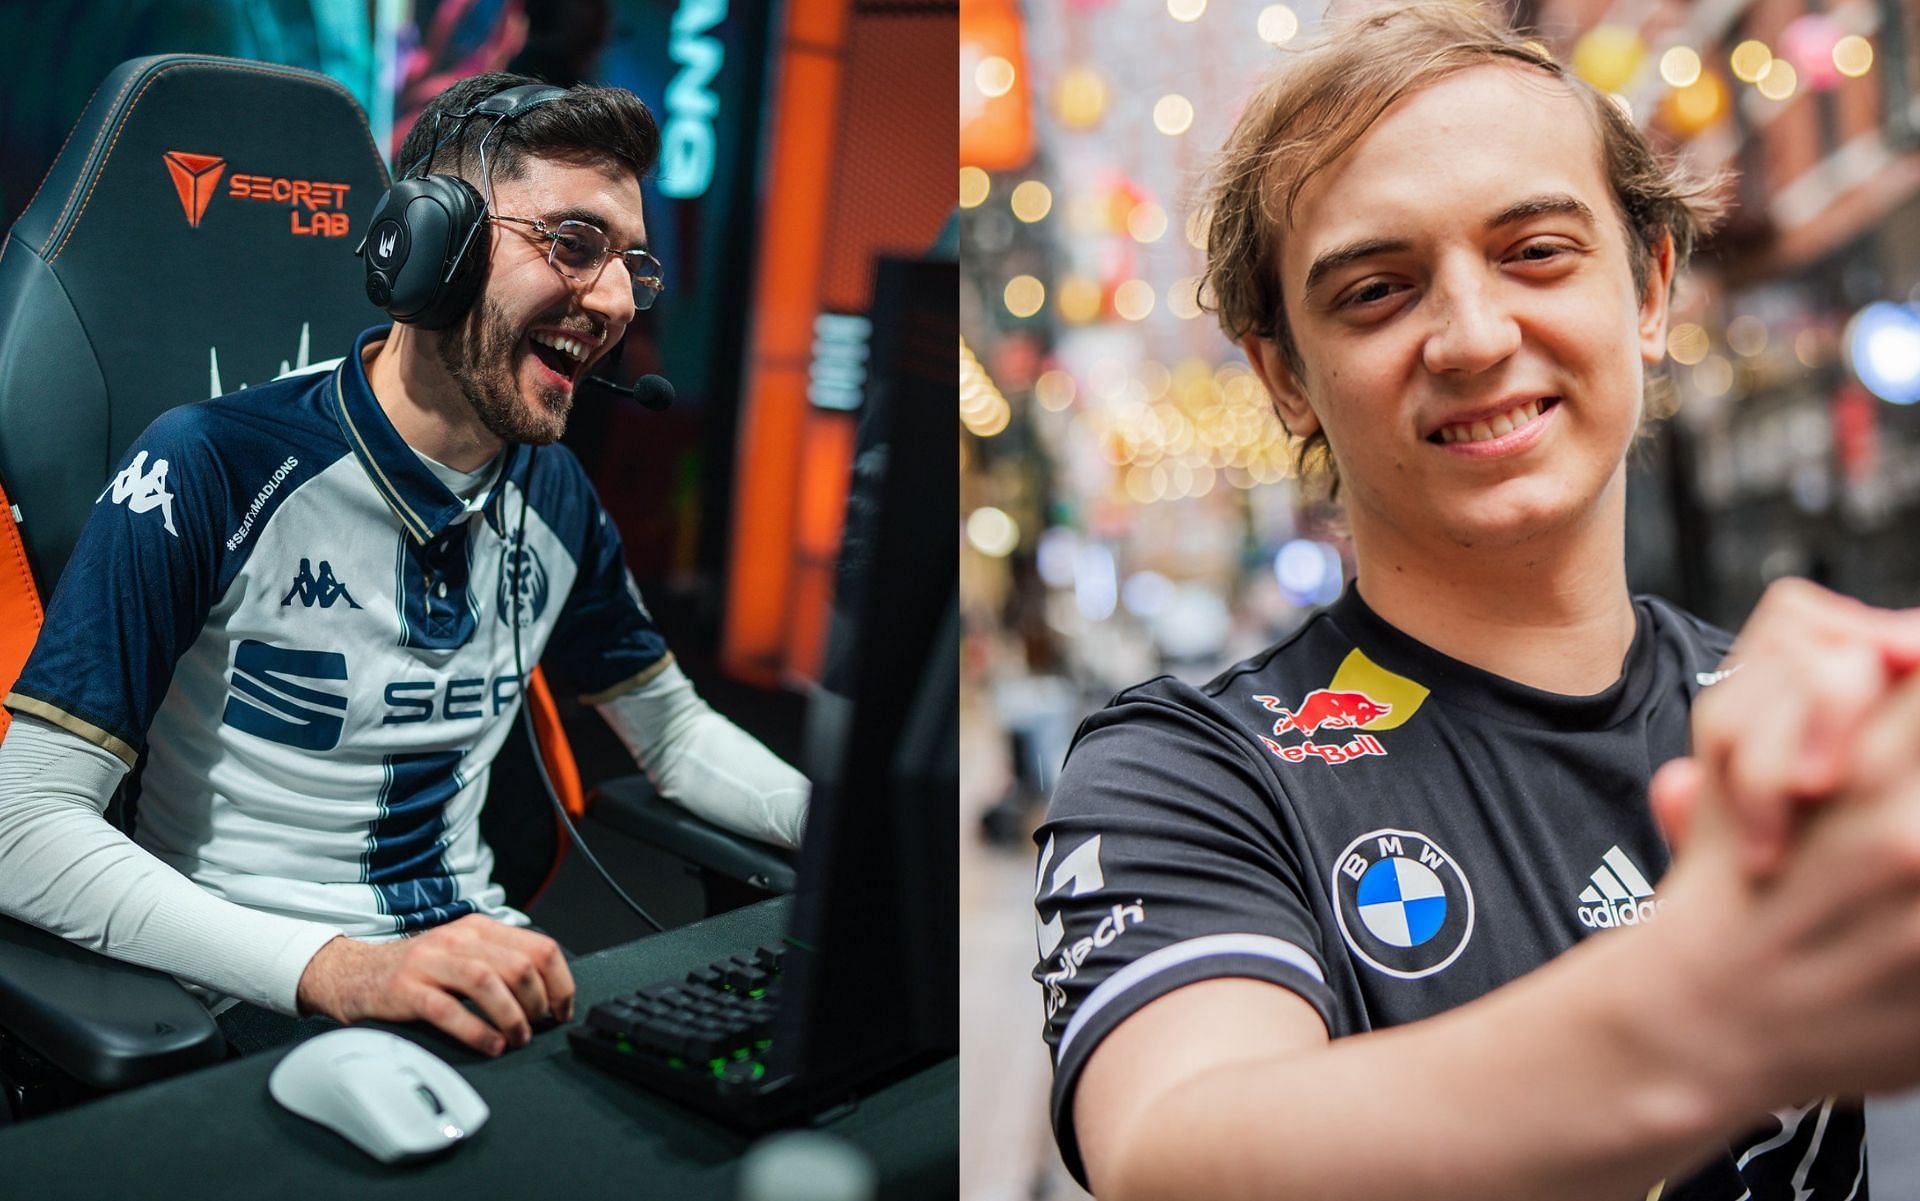 Nisqy and Caps will be key players when G2 Esports and the MAD Lions clash in League of Legends LEC 2023 Winter Split (Image via Riot Games)